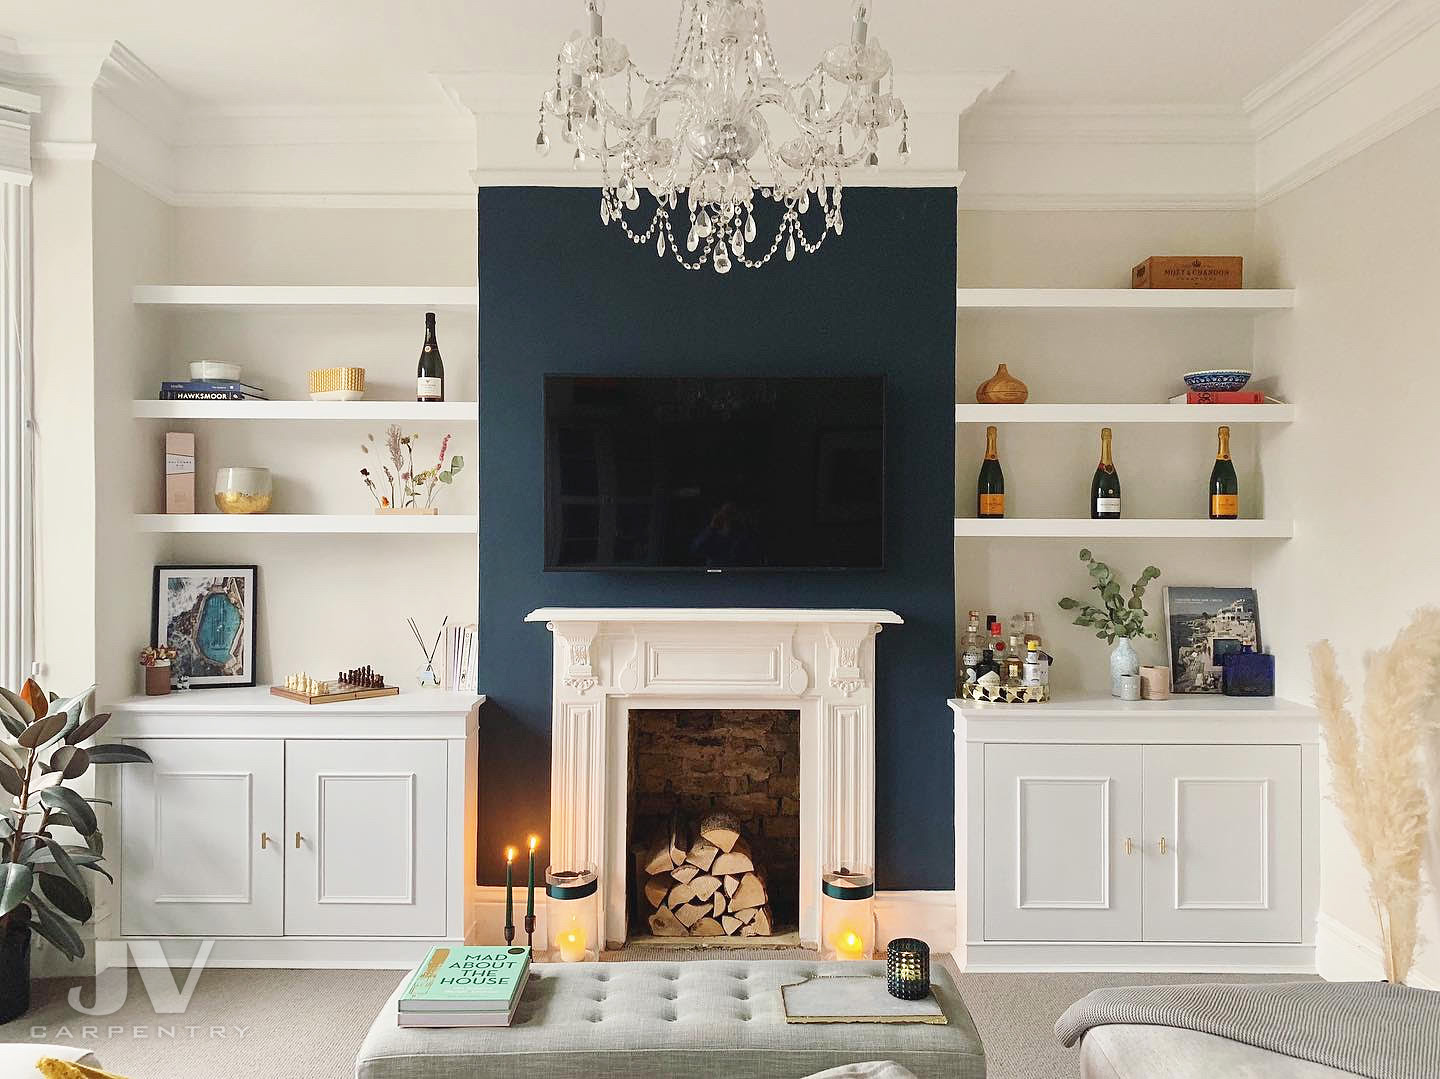 23 Alcove Shelving Ideas For Your, Floating Shelves Ideas Around Fireplace